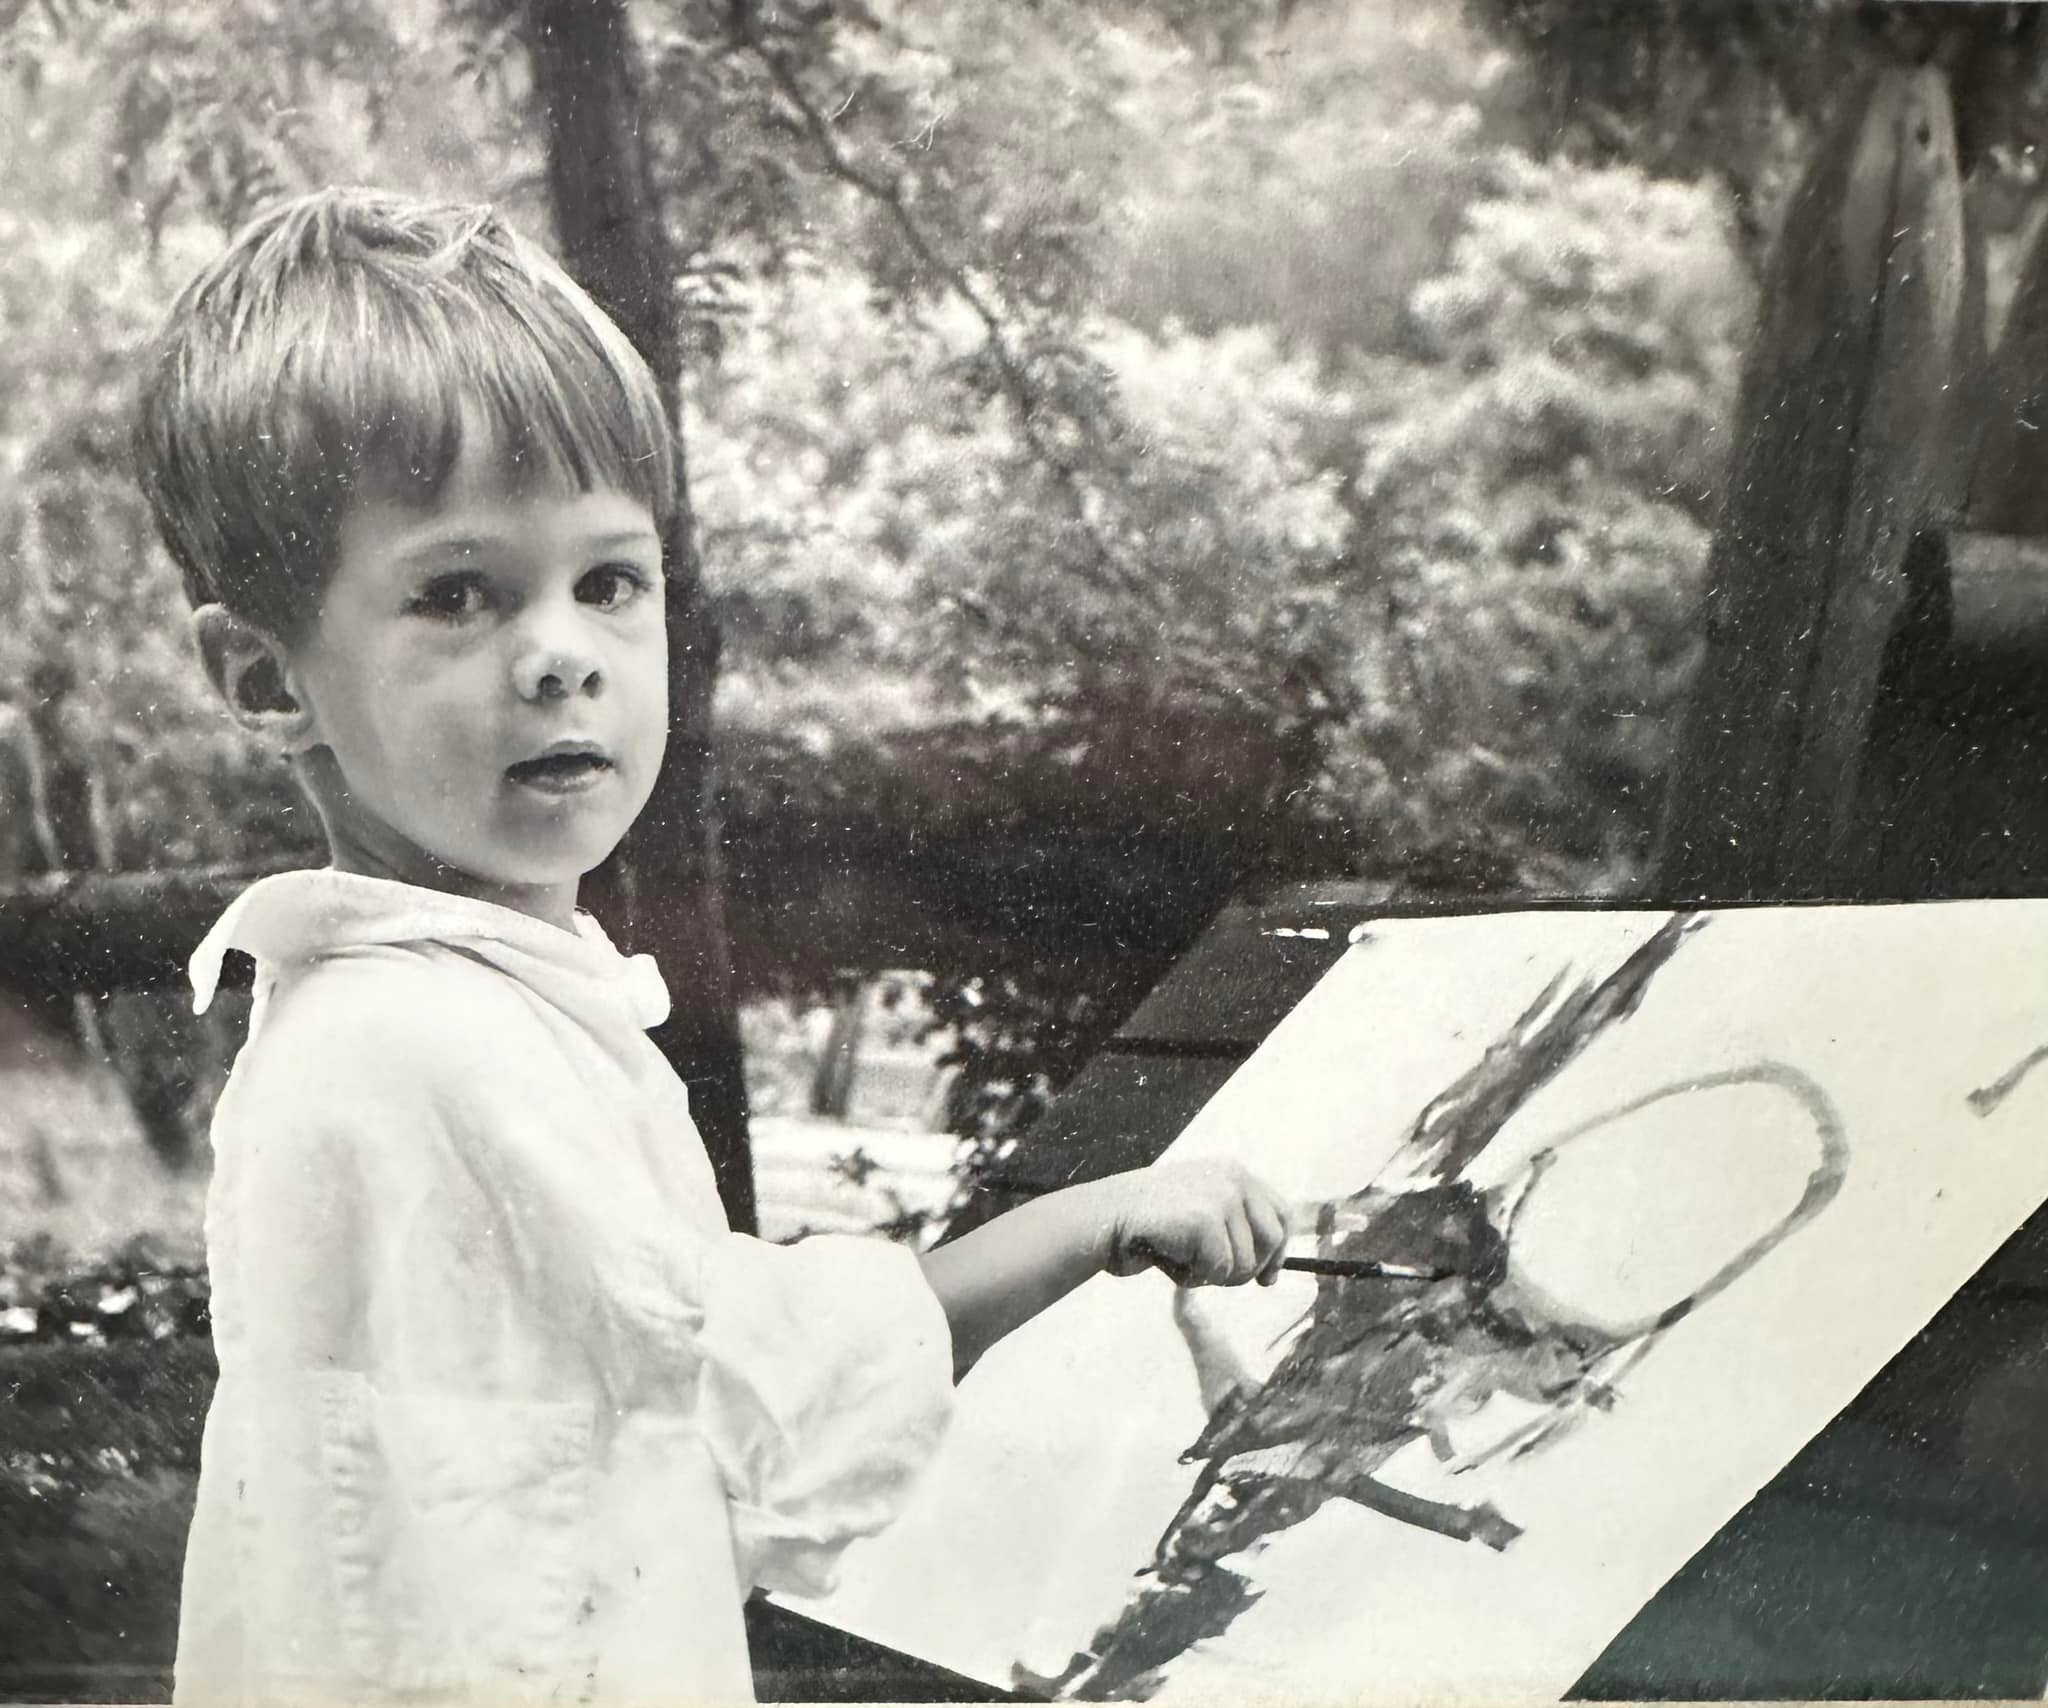 He was destined to be an artist (and we are happy he changed mediums and moved to photography!)
Welcome Eric into his next decade - our celebrating begins today but we keep it open-ended.
PS he has zero plans of slowing down.